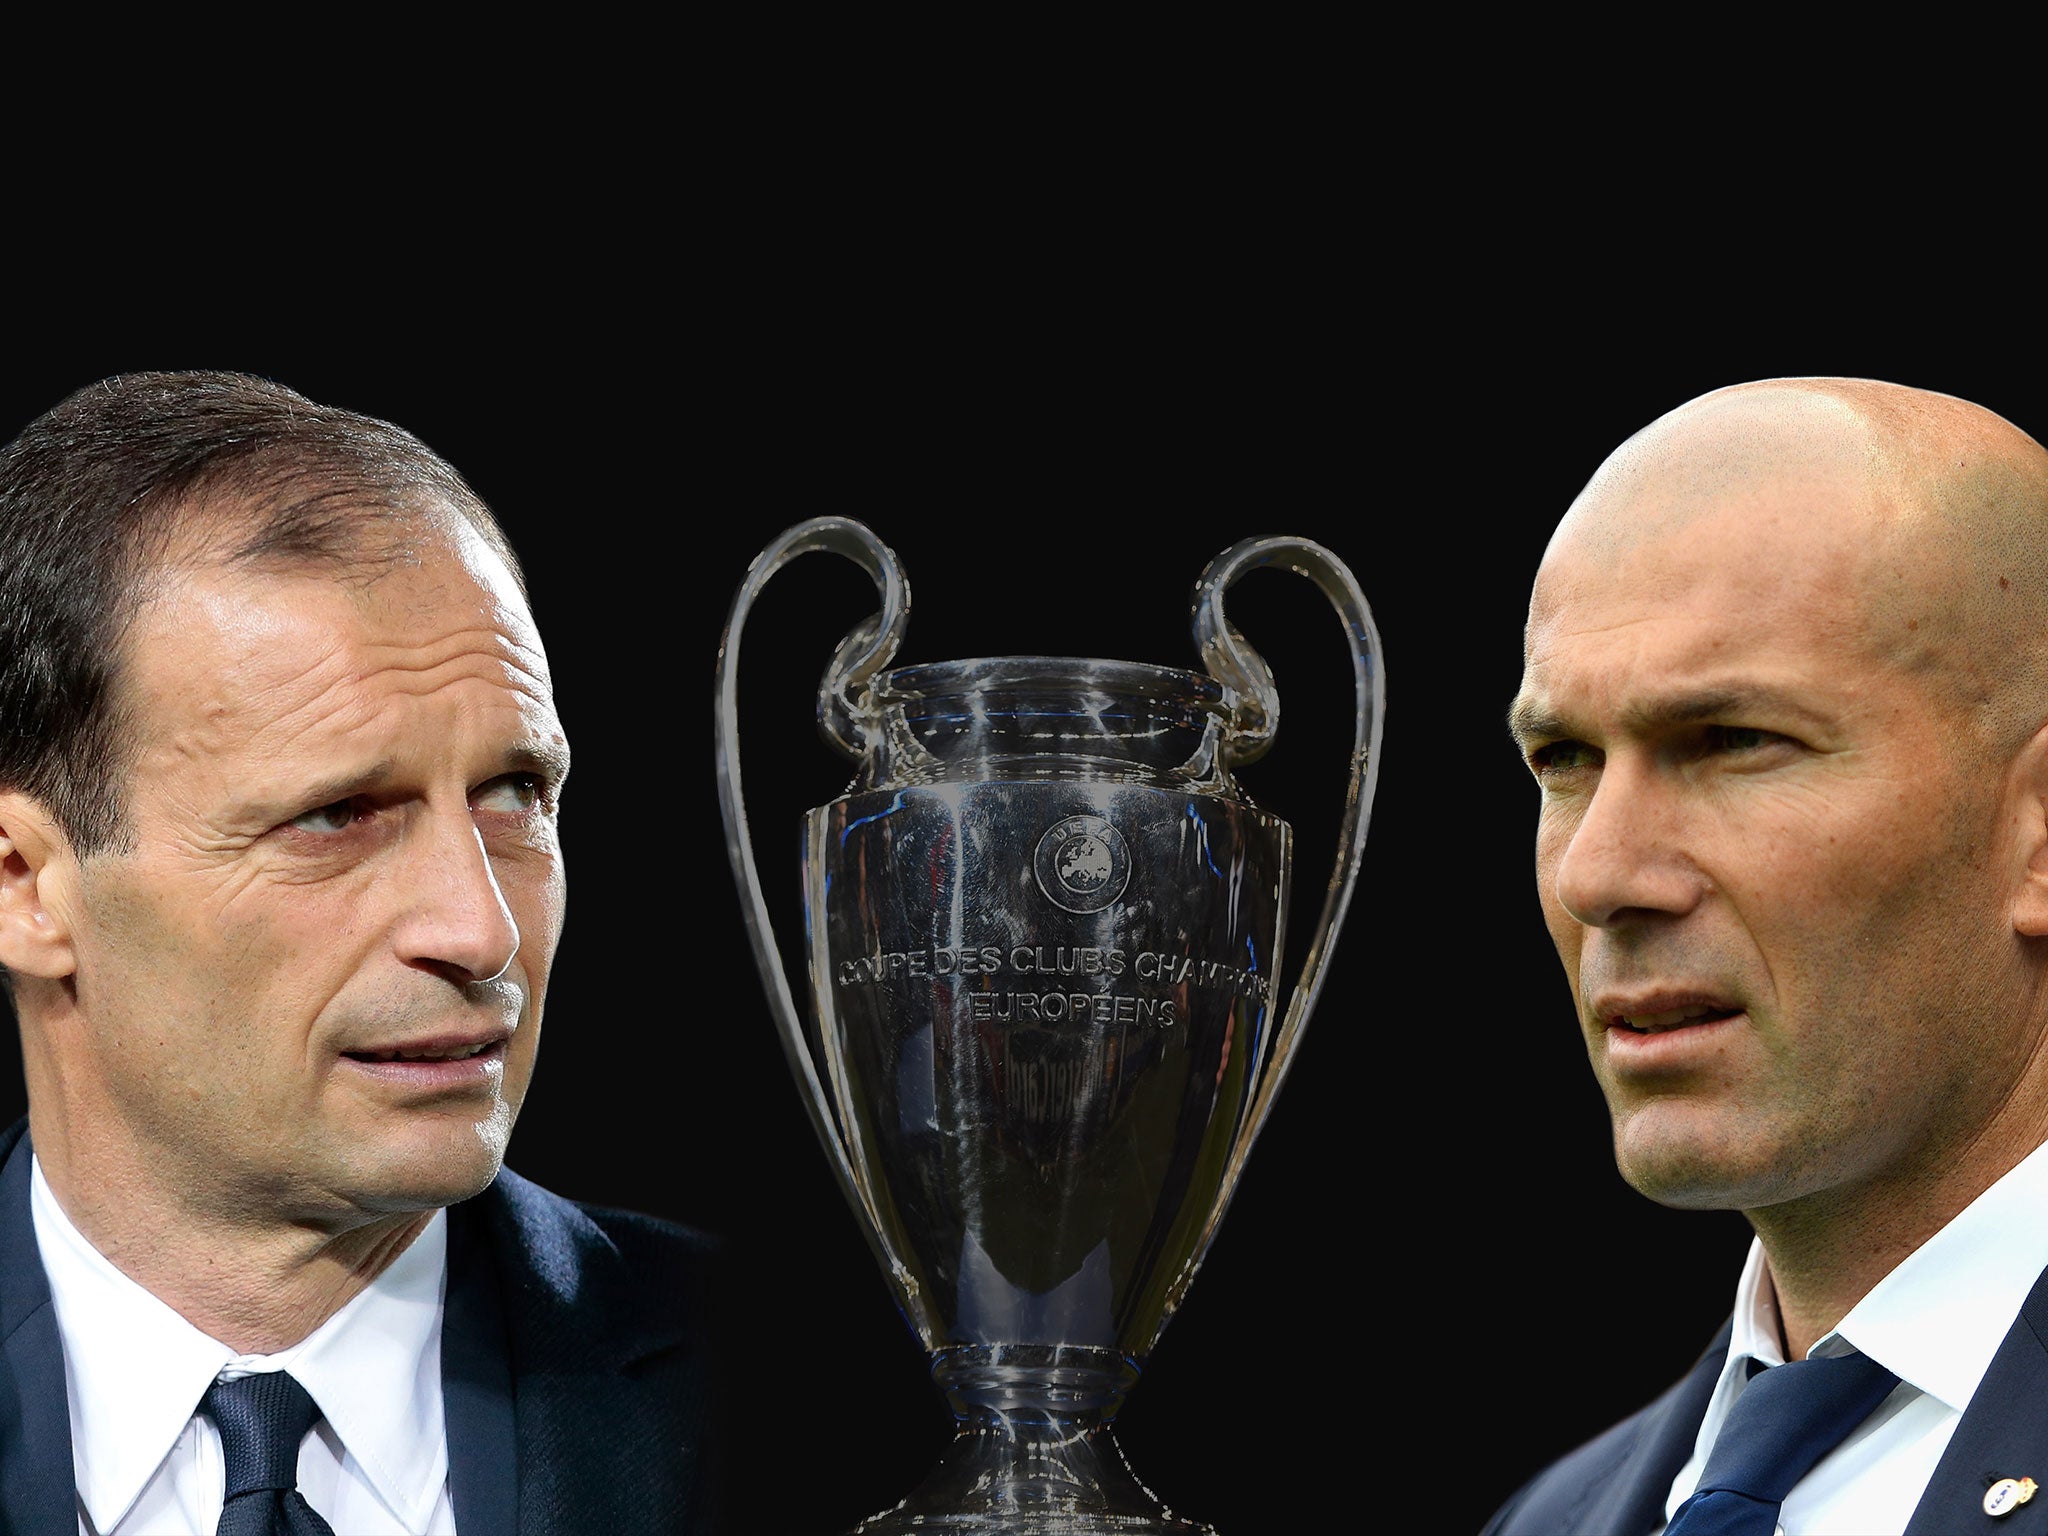 Juventus and Real Madrid meet in Cardiff on Saturday night